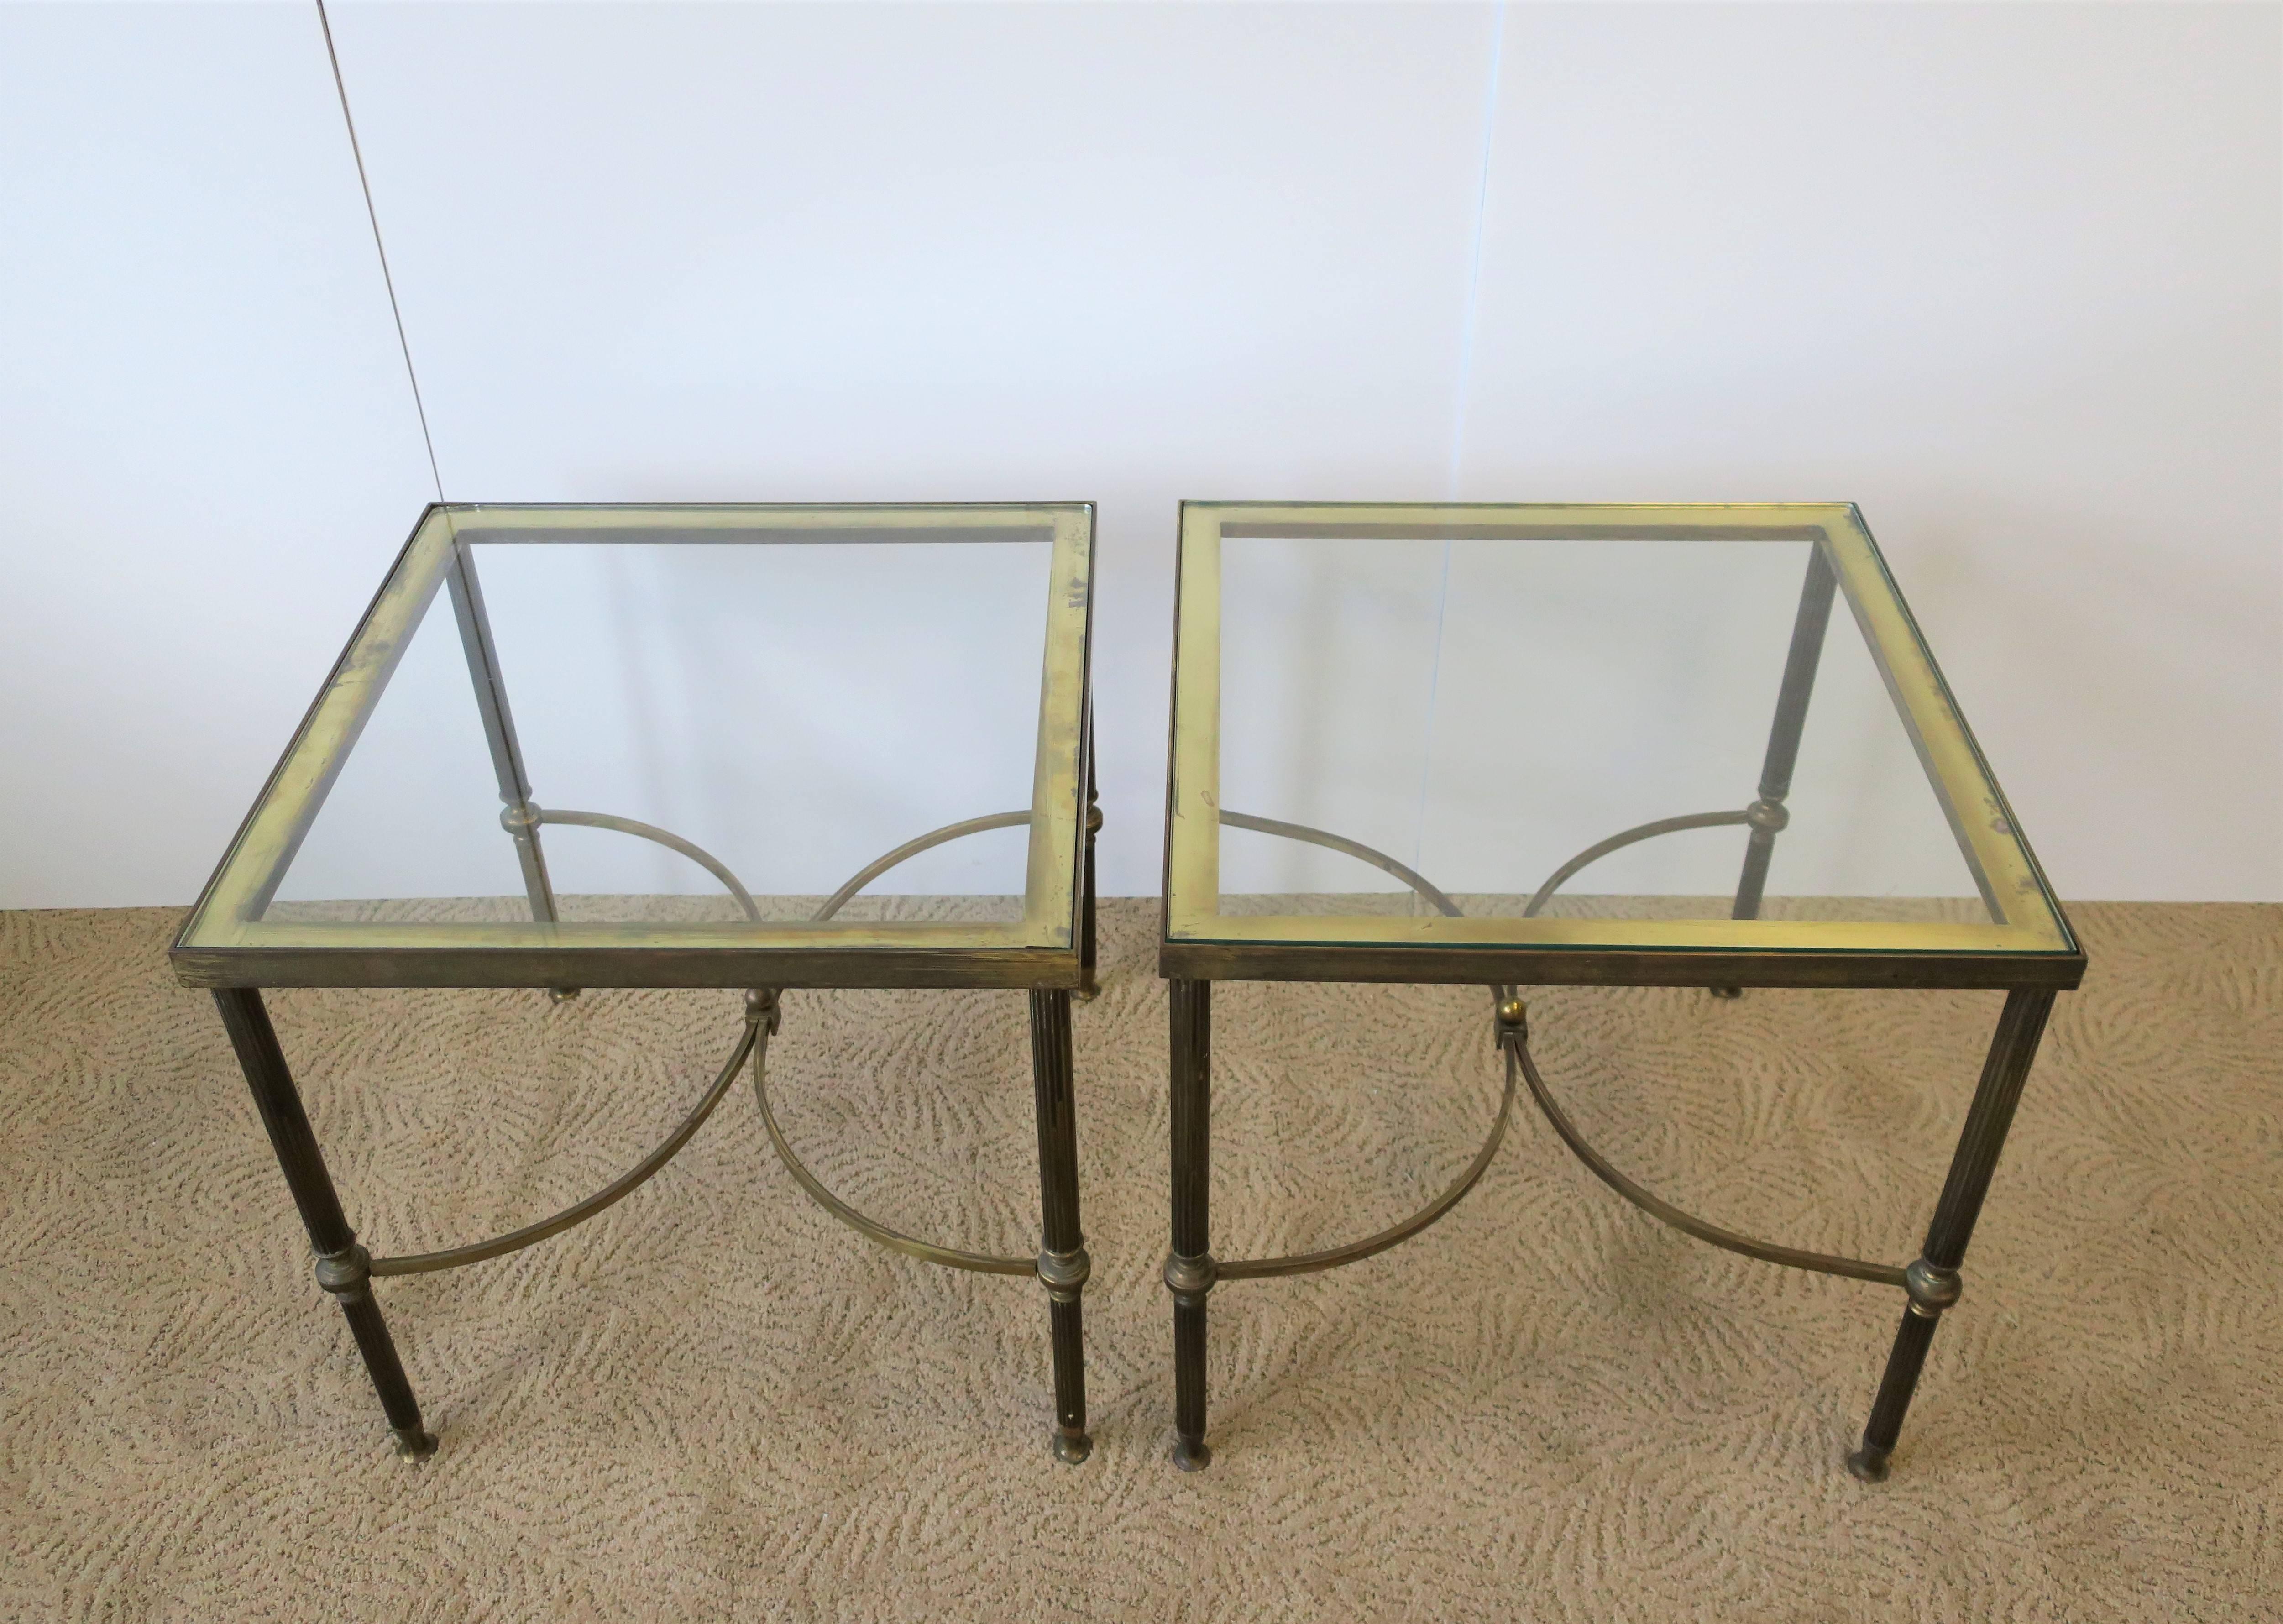 A beautiful and substantial pair of Mid-20th century European (Italian or French) square brass and glass end tables. Pair are a Directoire design style attributed to design-house Maison Jansen, circa Mid-20th Century. Brass frames have decorative